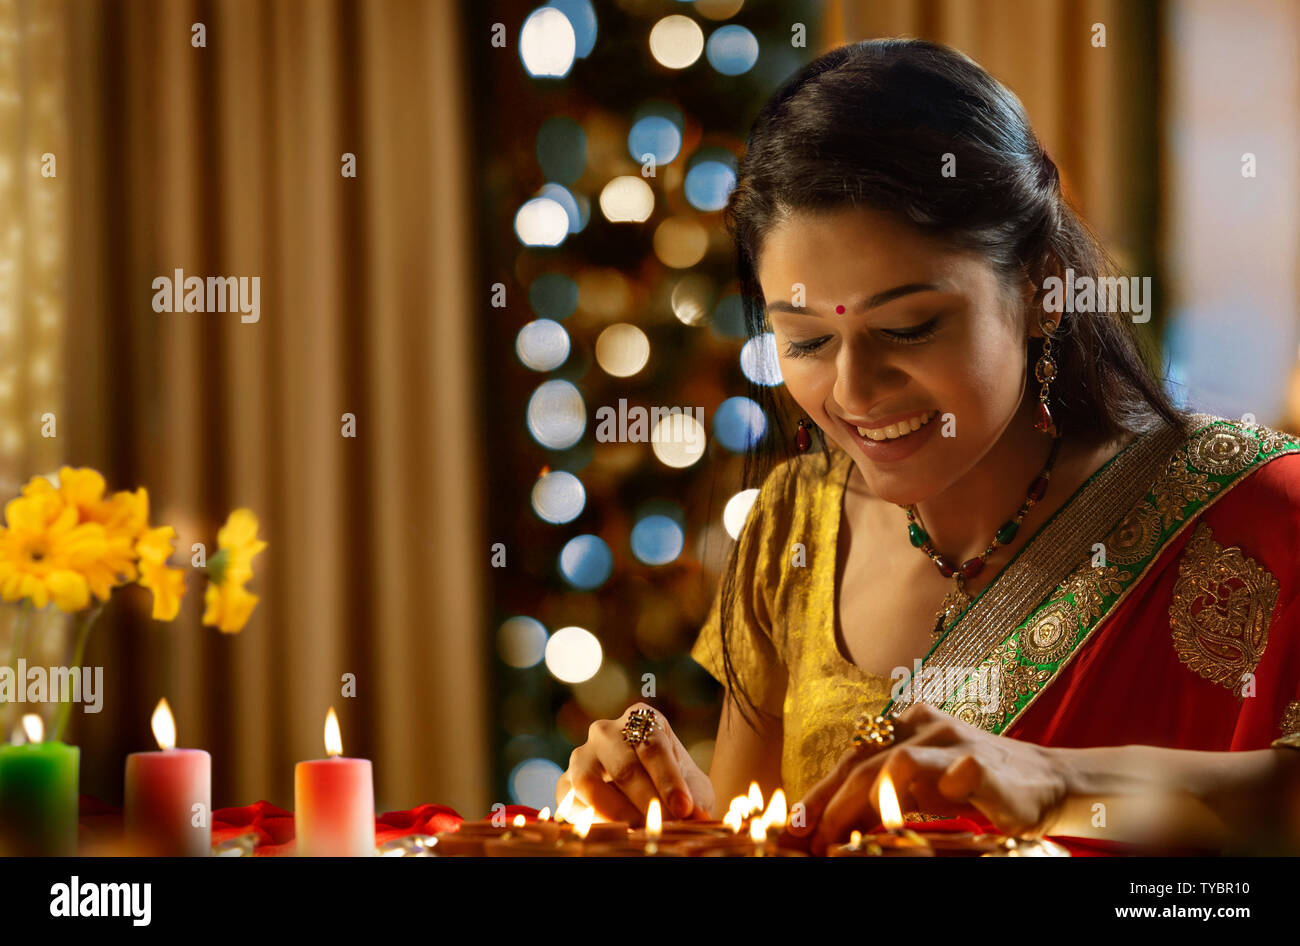 Woman decorating the house with diya on the occasion of diwali Stock Photo